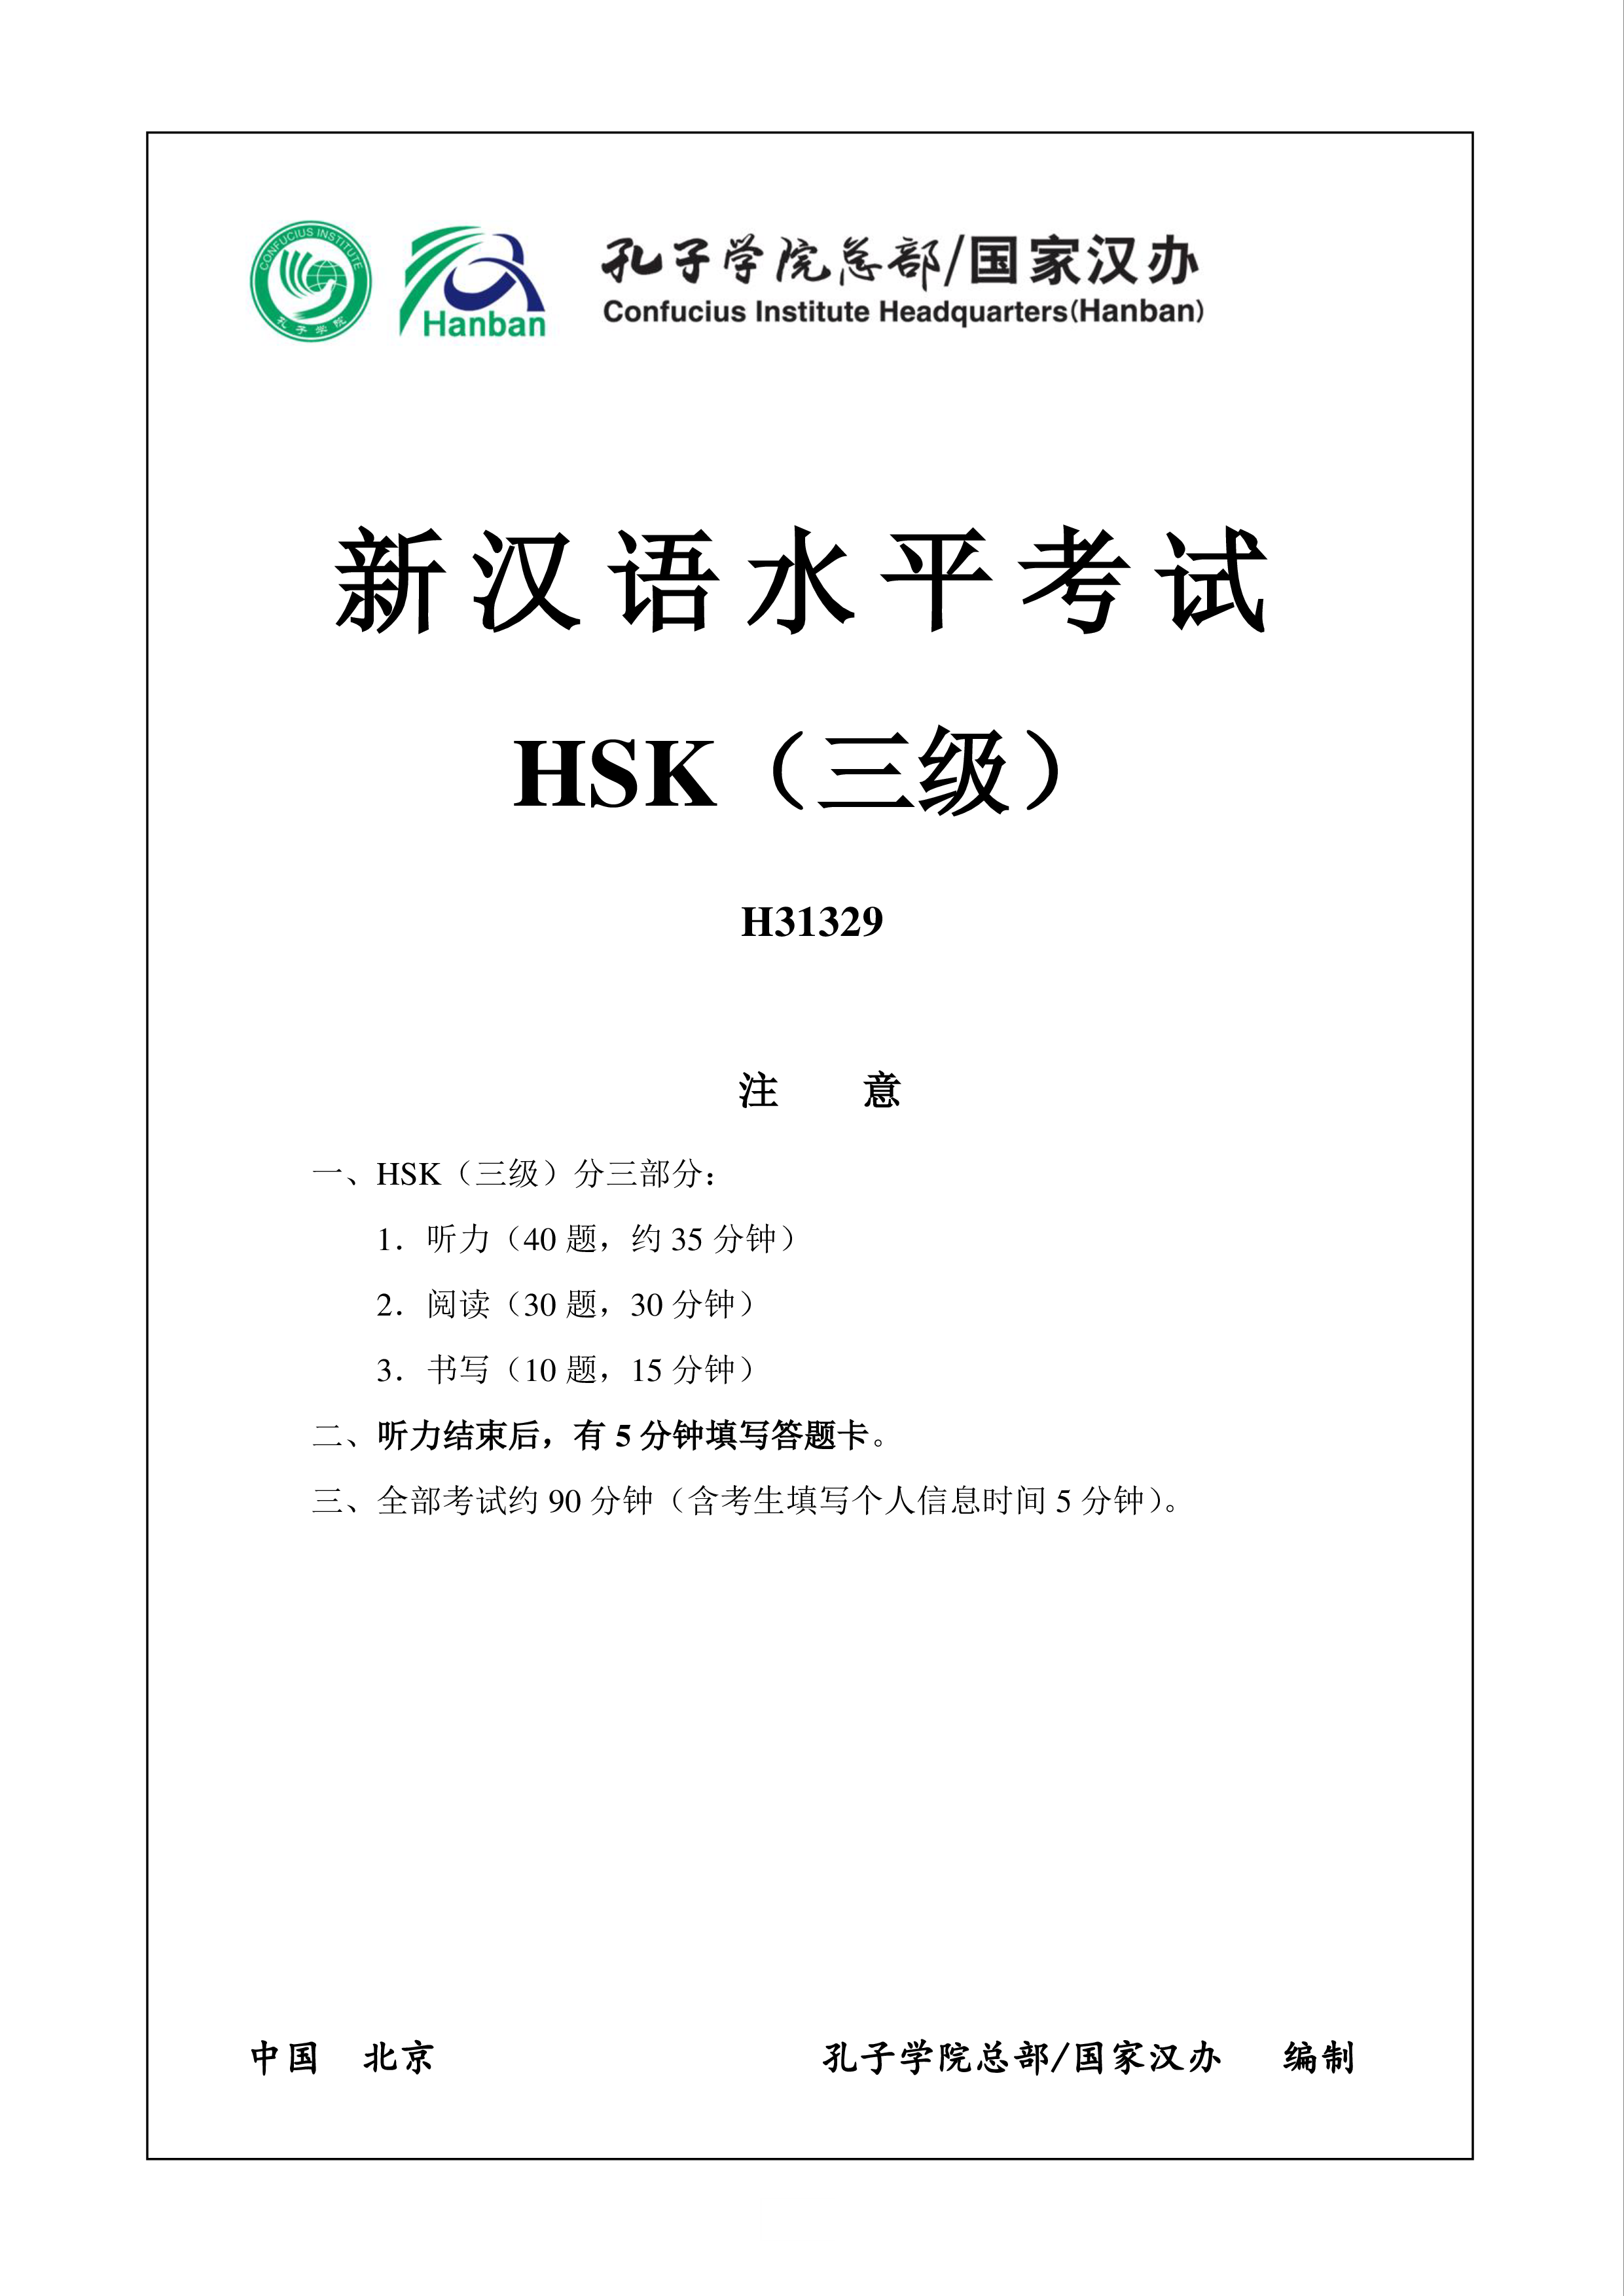 hsk3 chinese exam including answers # h31329 template